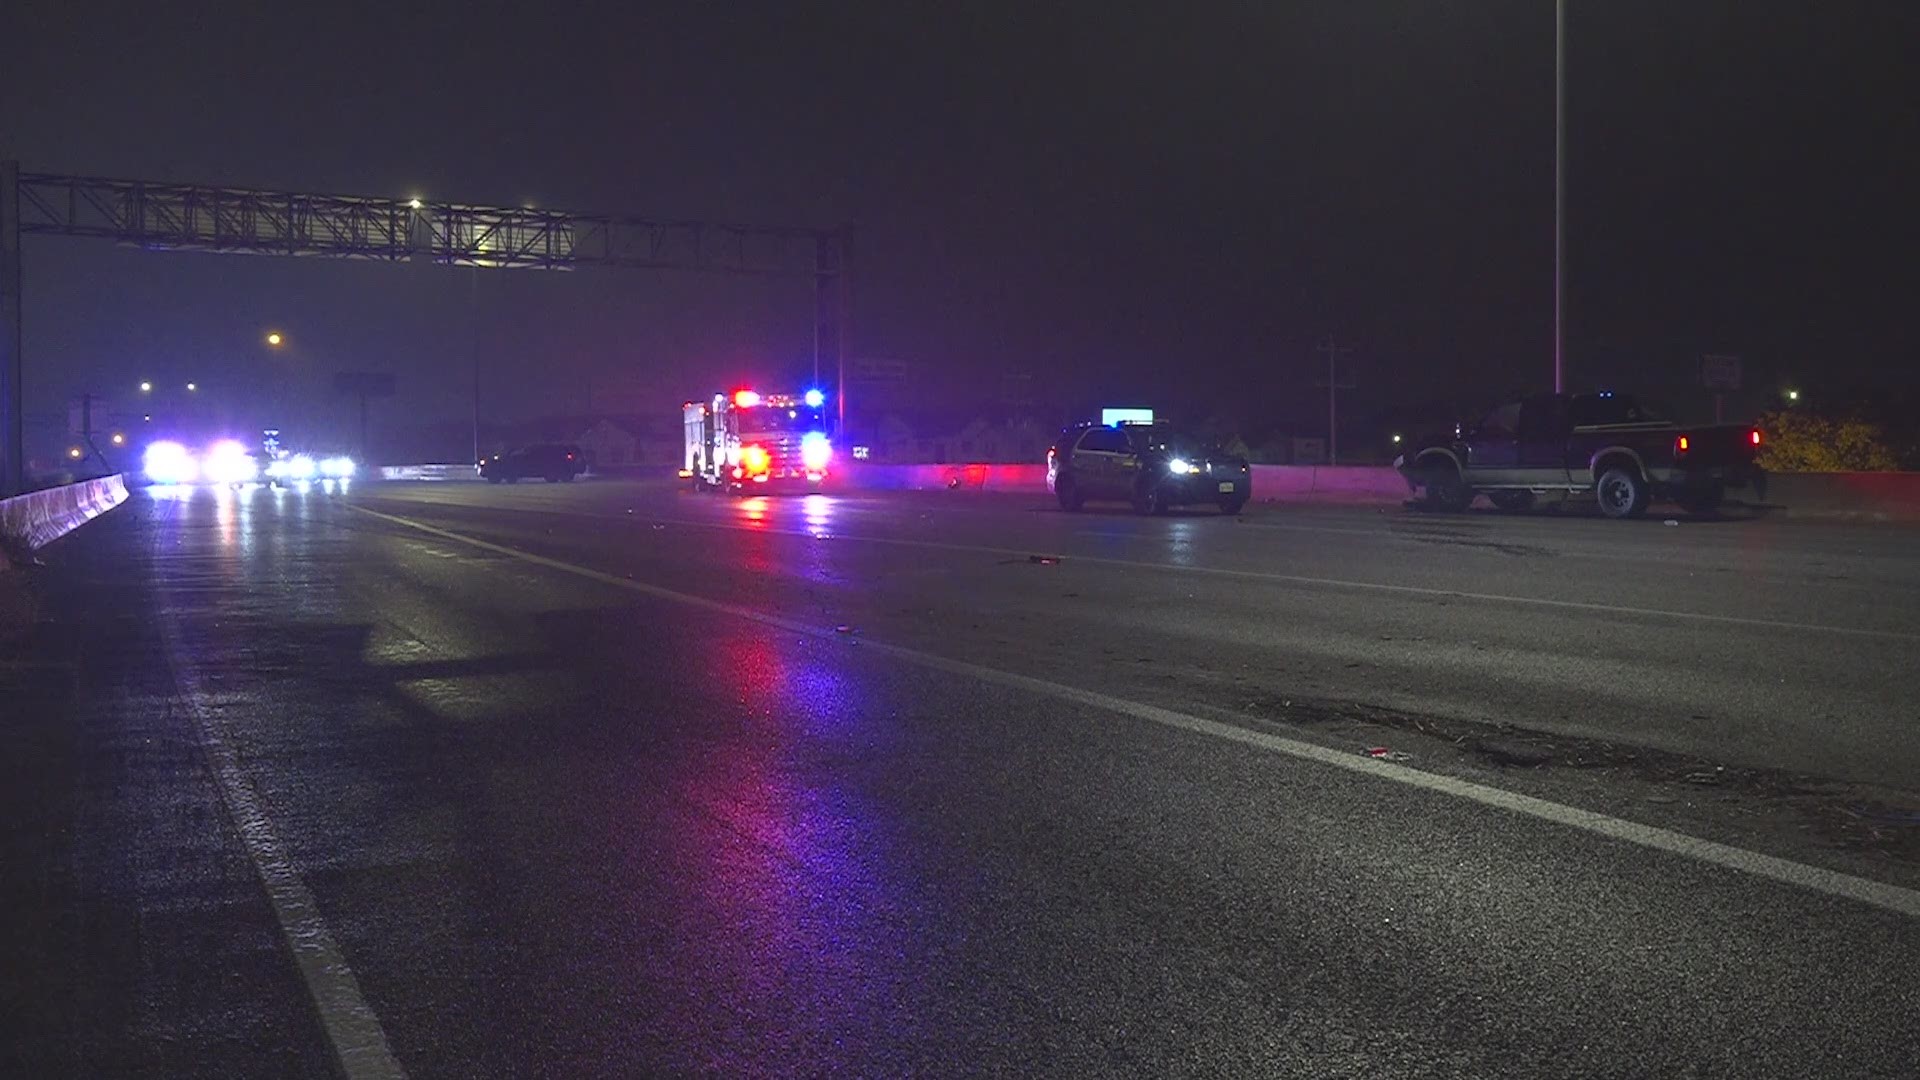 An SAPD officer was injured while responding to an accident scene overnight.